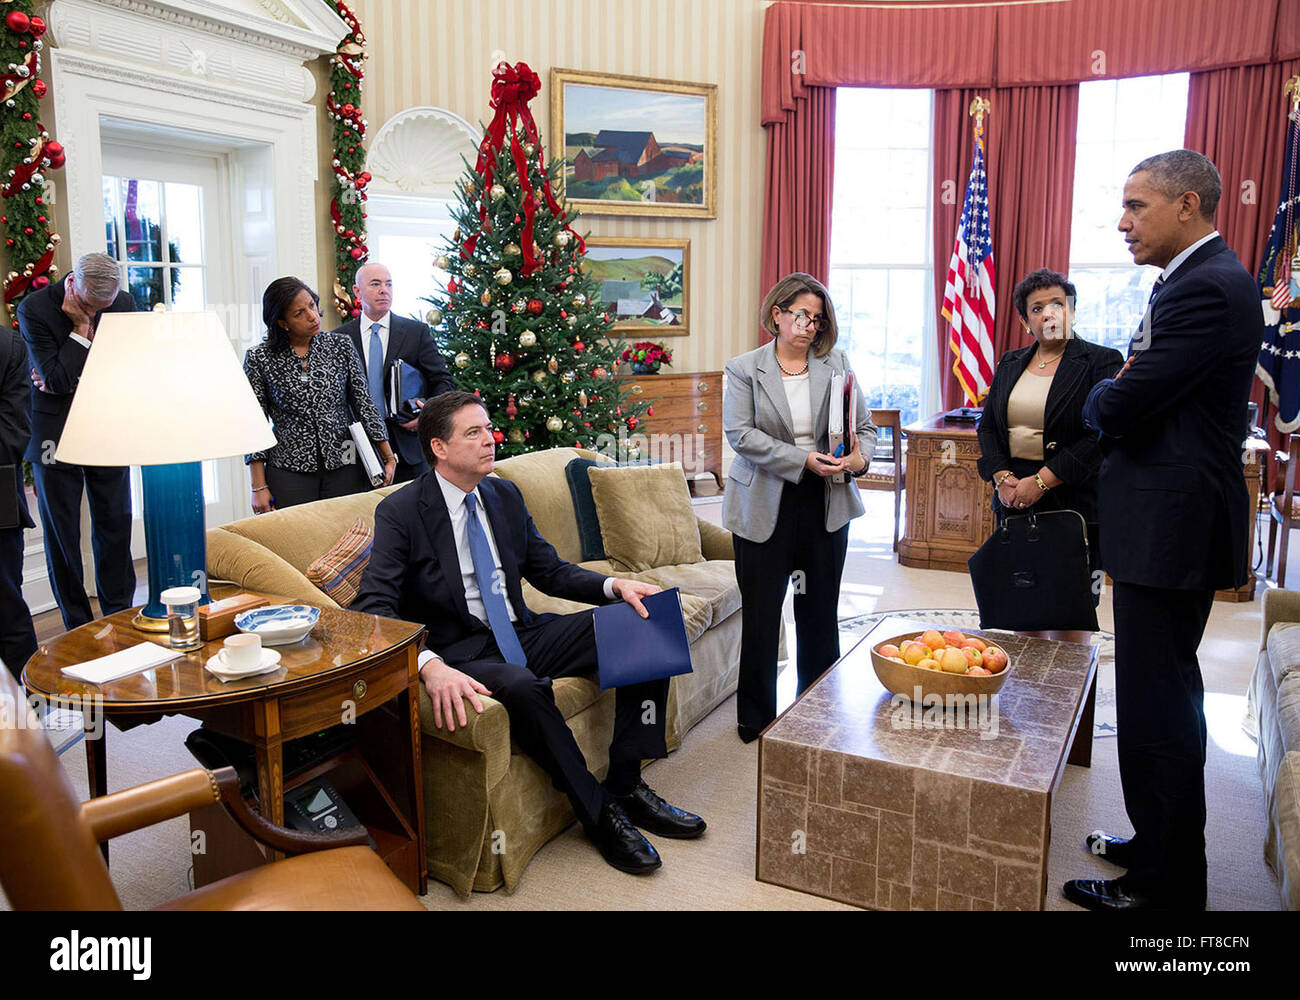 Dec. 3, 2015 'Following a meeting to discuss the latest information on the mass shootings in San Bernardino, Calif., the President has some last words with, from left, Chief of Staff Denis McDonough, National Security Advisor Susan E. Rice, FBI Director James Comey (seated on sofa), Alejandro N. Mayorkas, Deputy Secretary of Homeland Security, Lisa Monaco, Assistant to the President for Homeland Security and Counterterrorism, and Attorney General Loretta Lynch.' (Official White House Photo by Pete Souza) Stock Photo